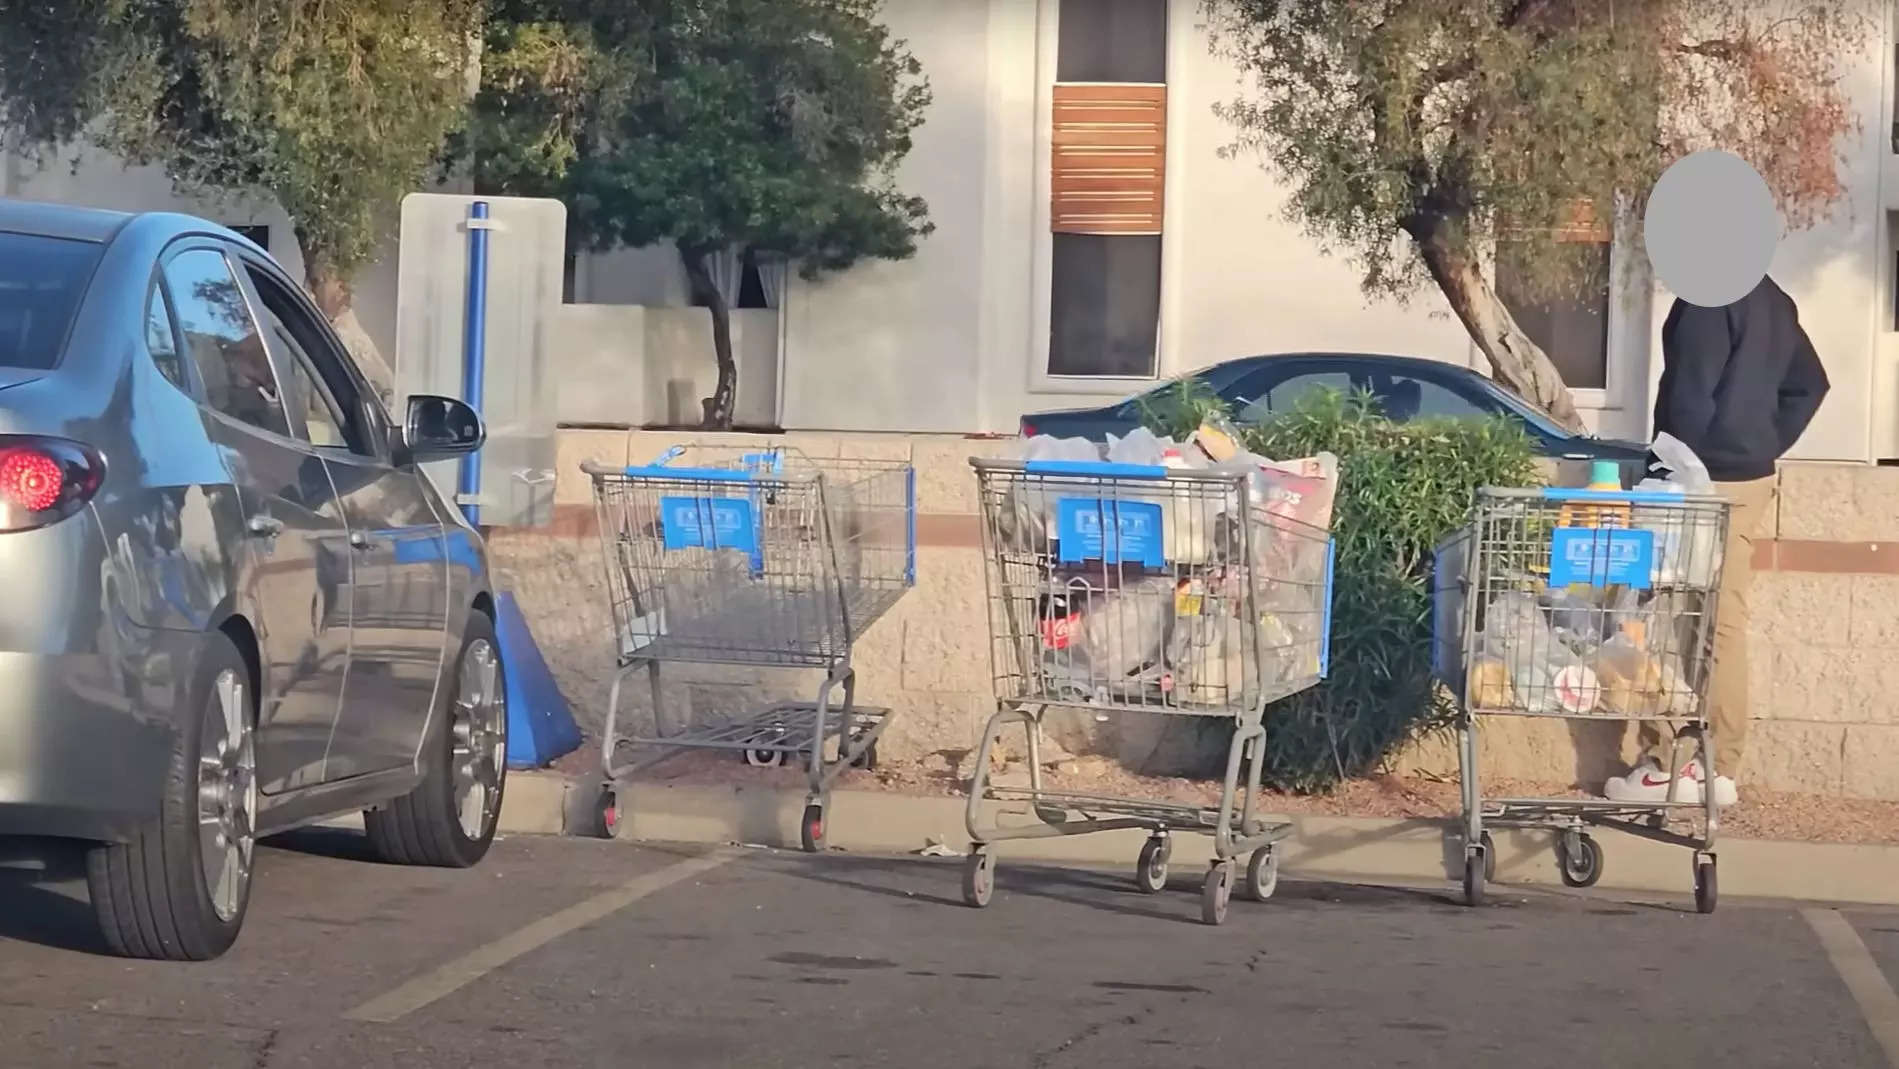 Shopping carts with groceries in a Walmart parking lot.